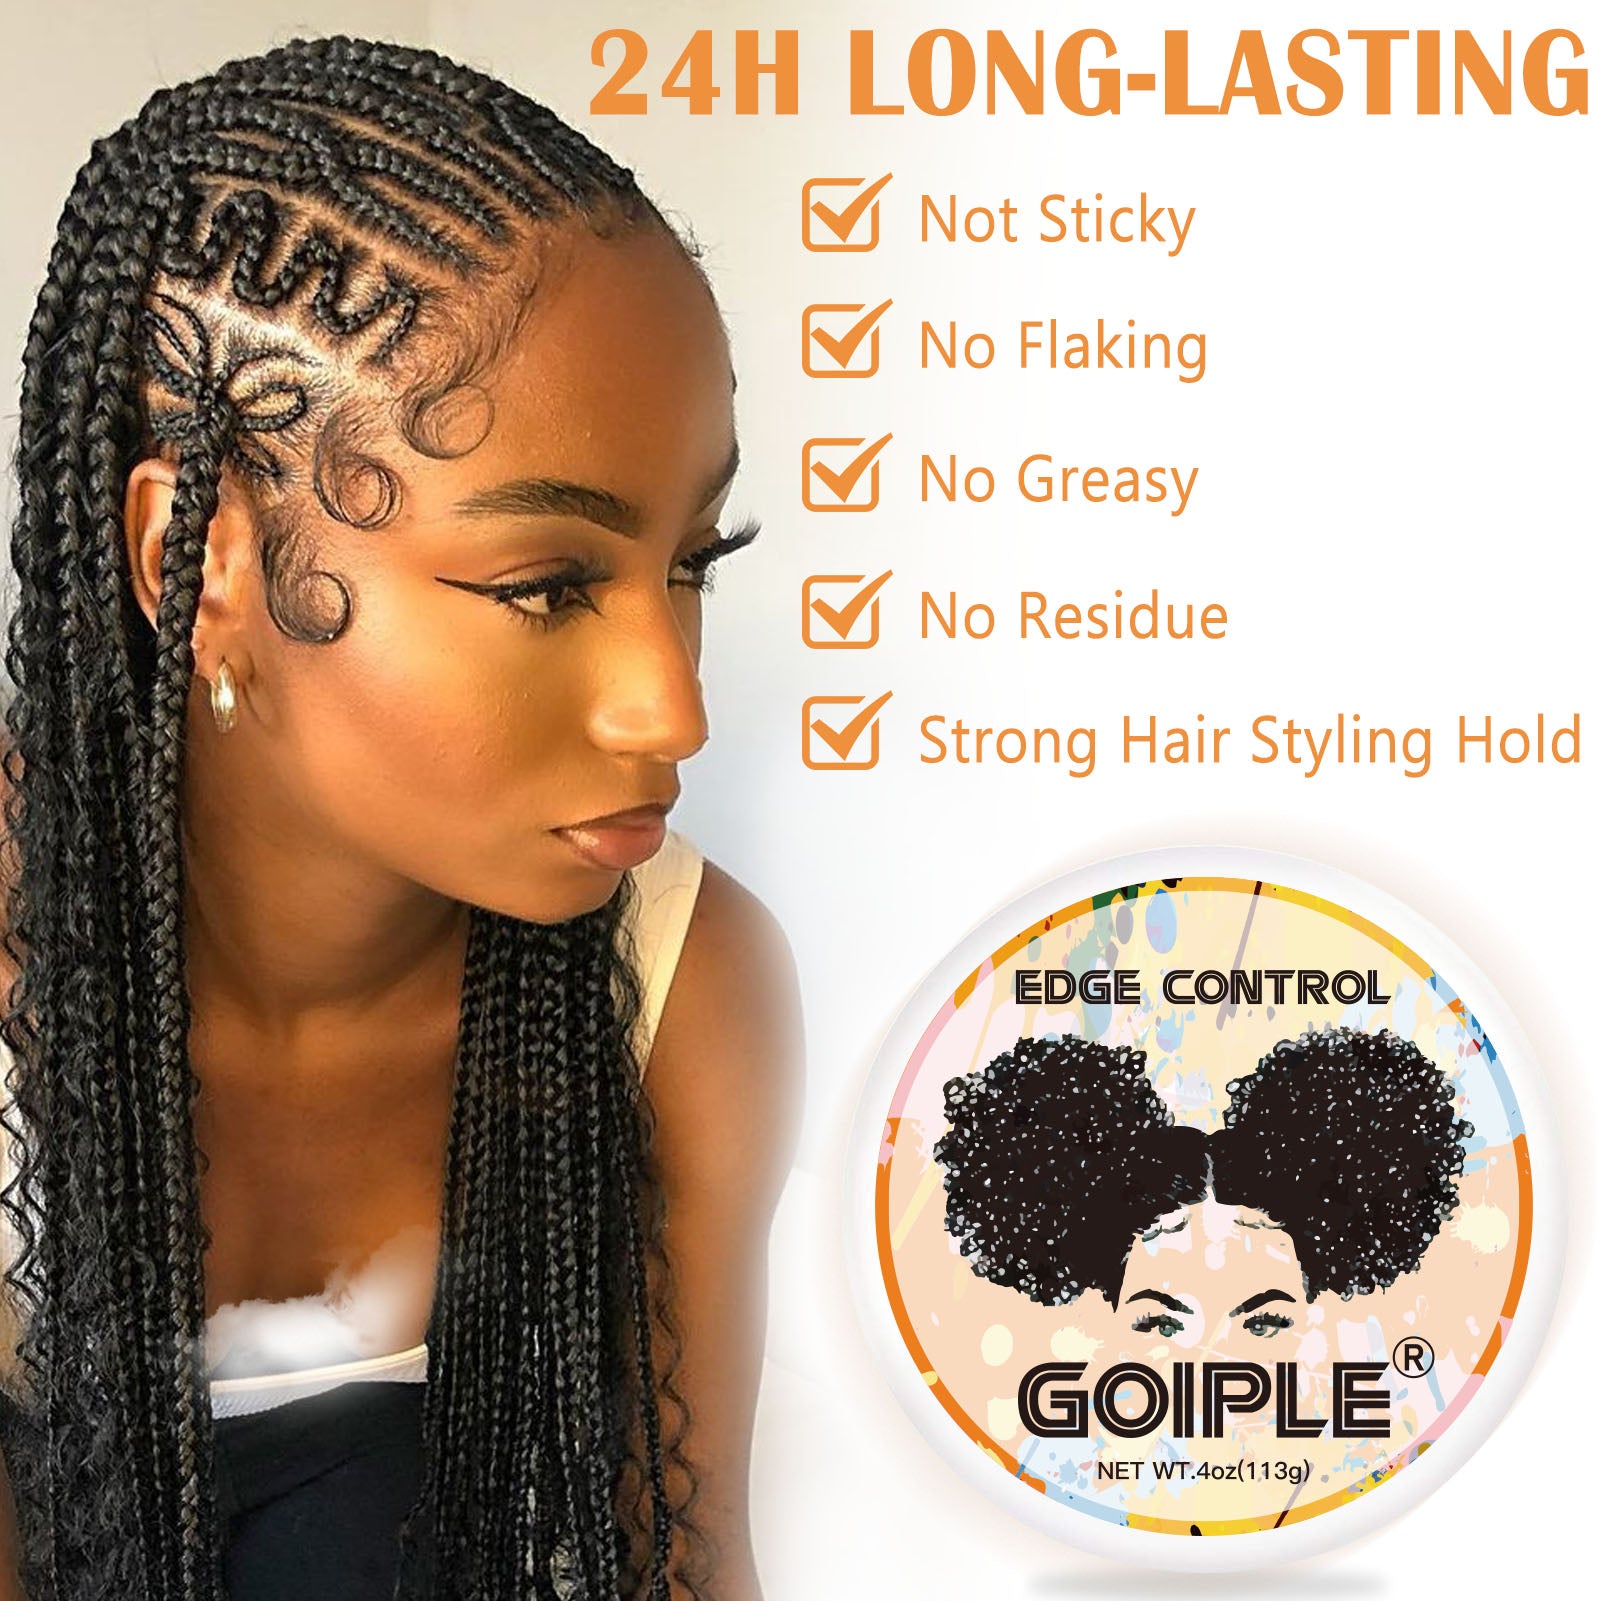 Edge Control Wax for Women Strong Hold Non-greasy (Citrus Scent)